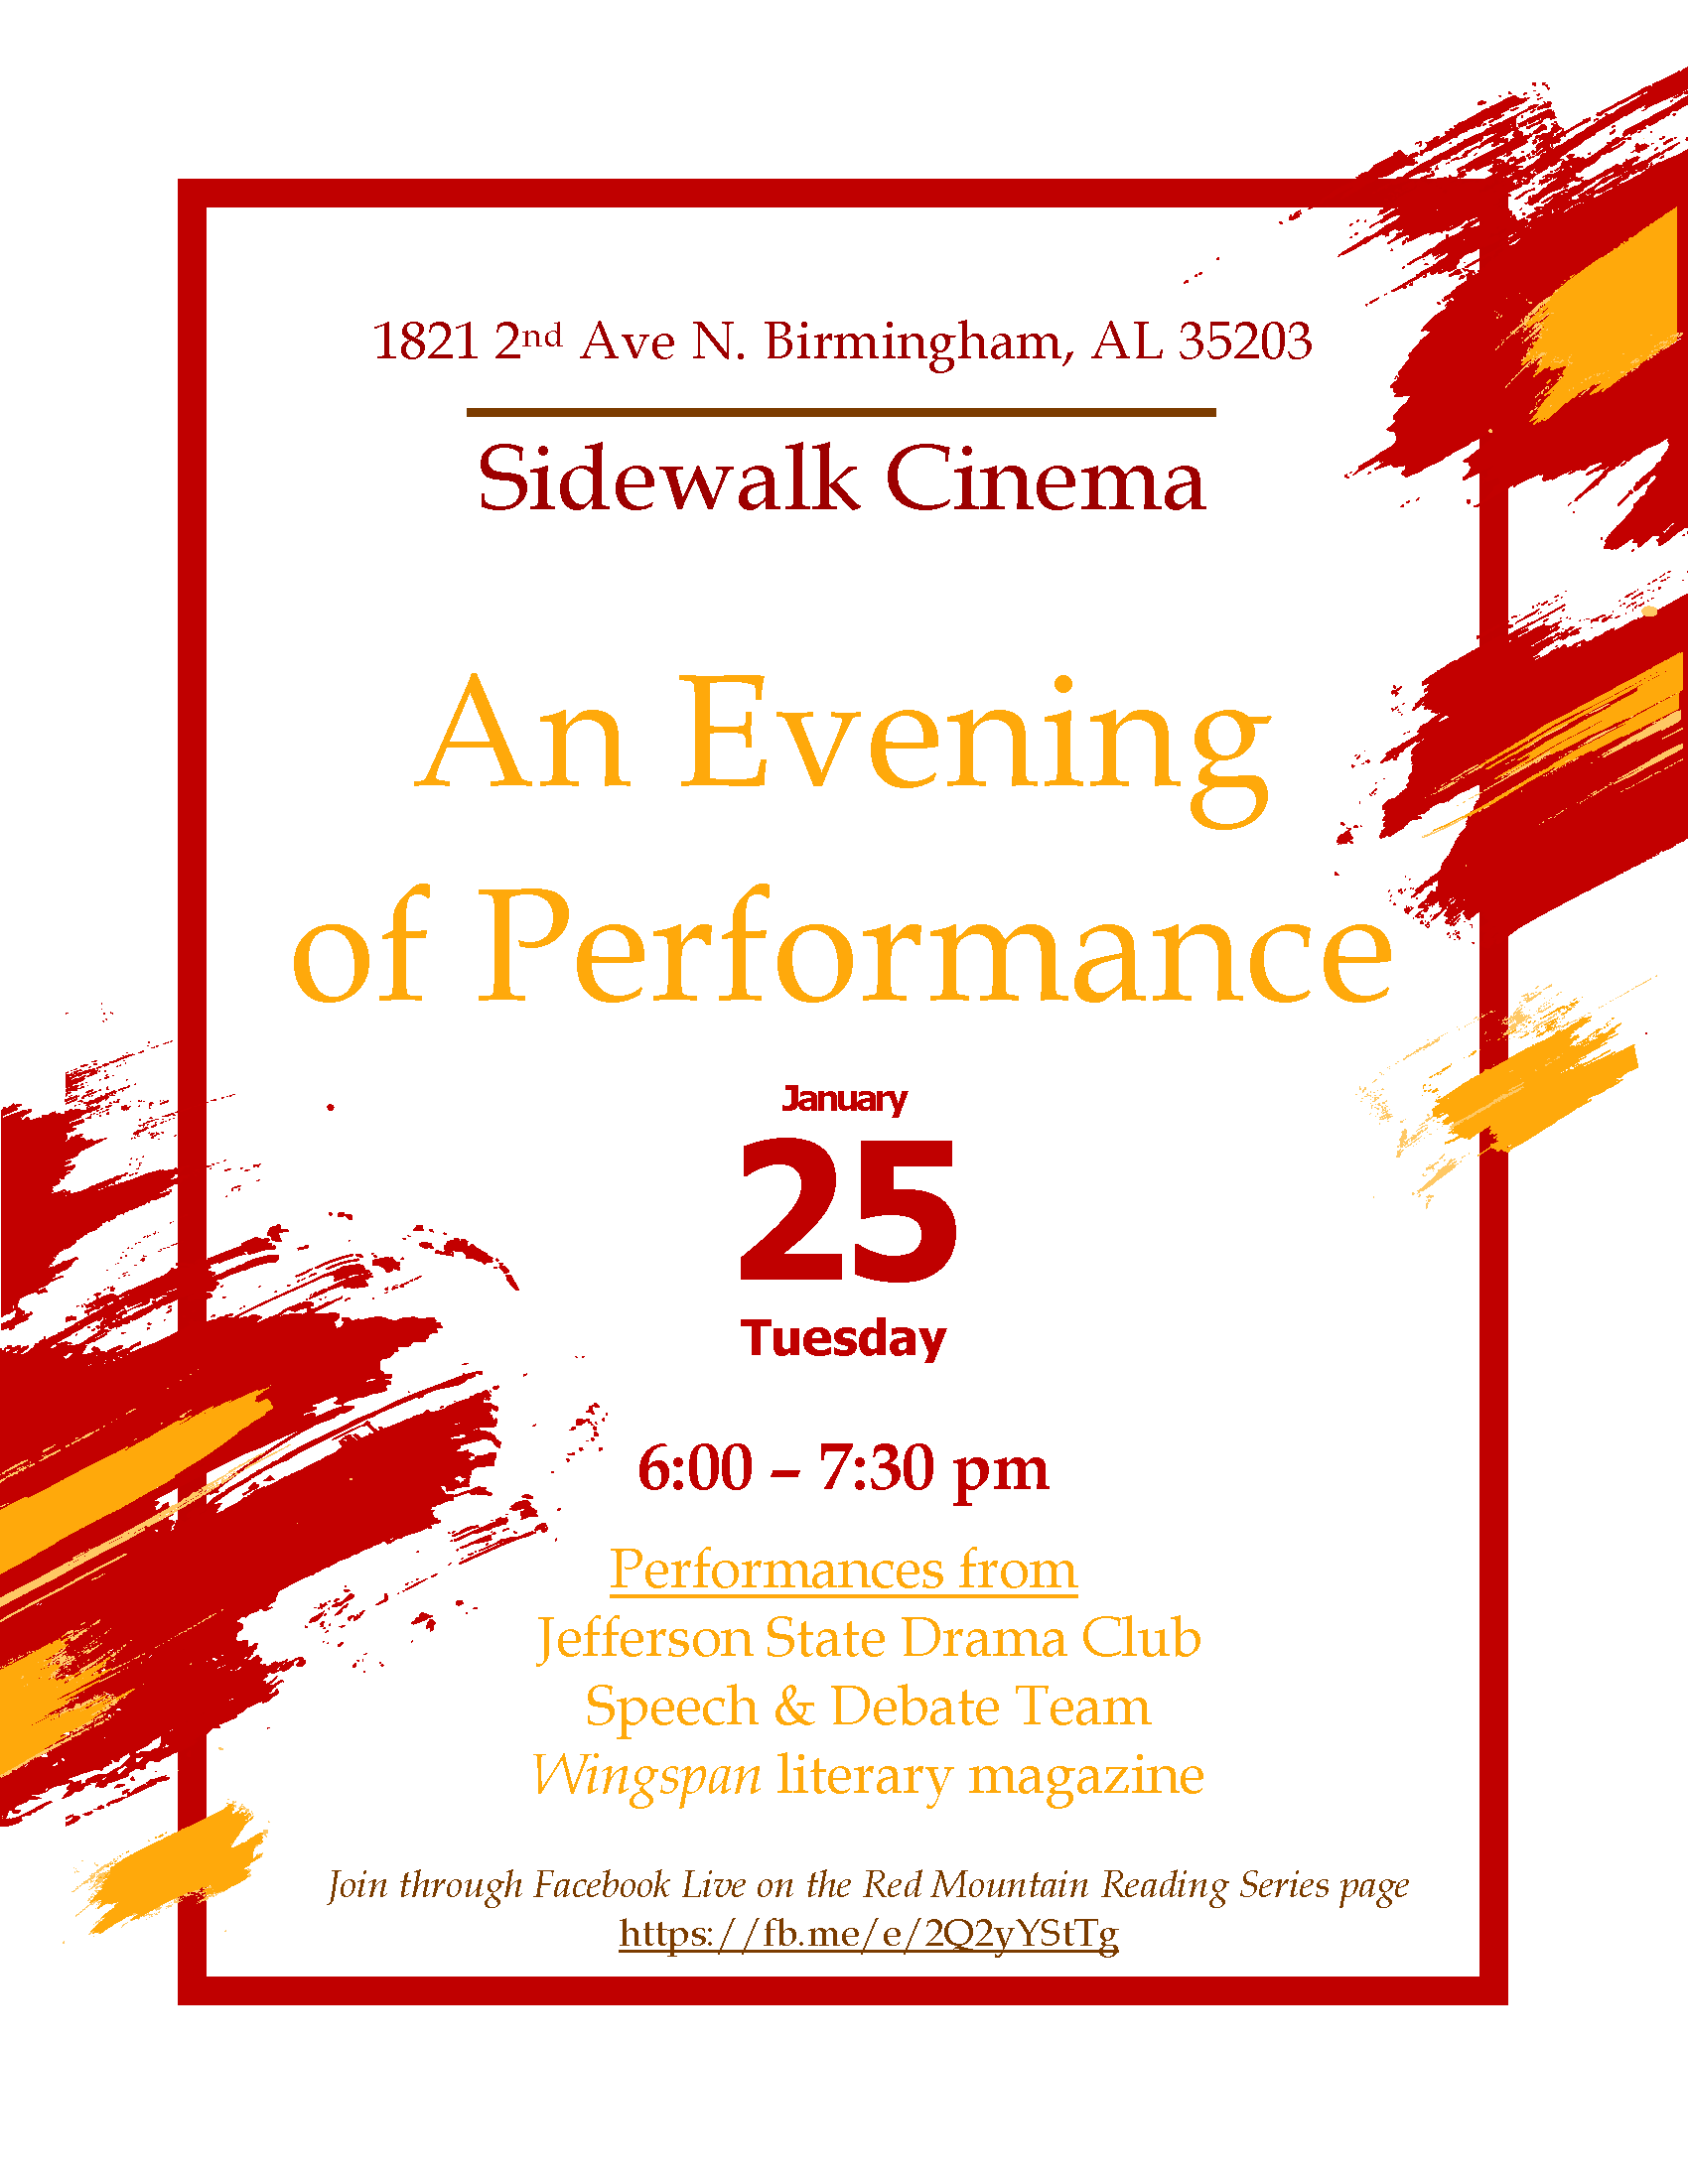 Evening of Performance flyer 2022